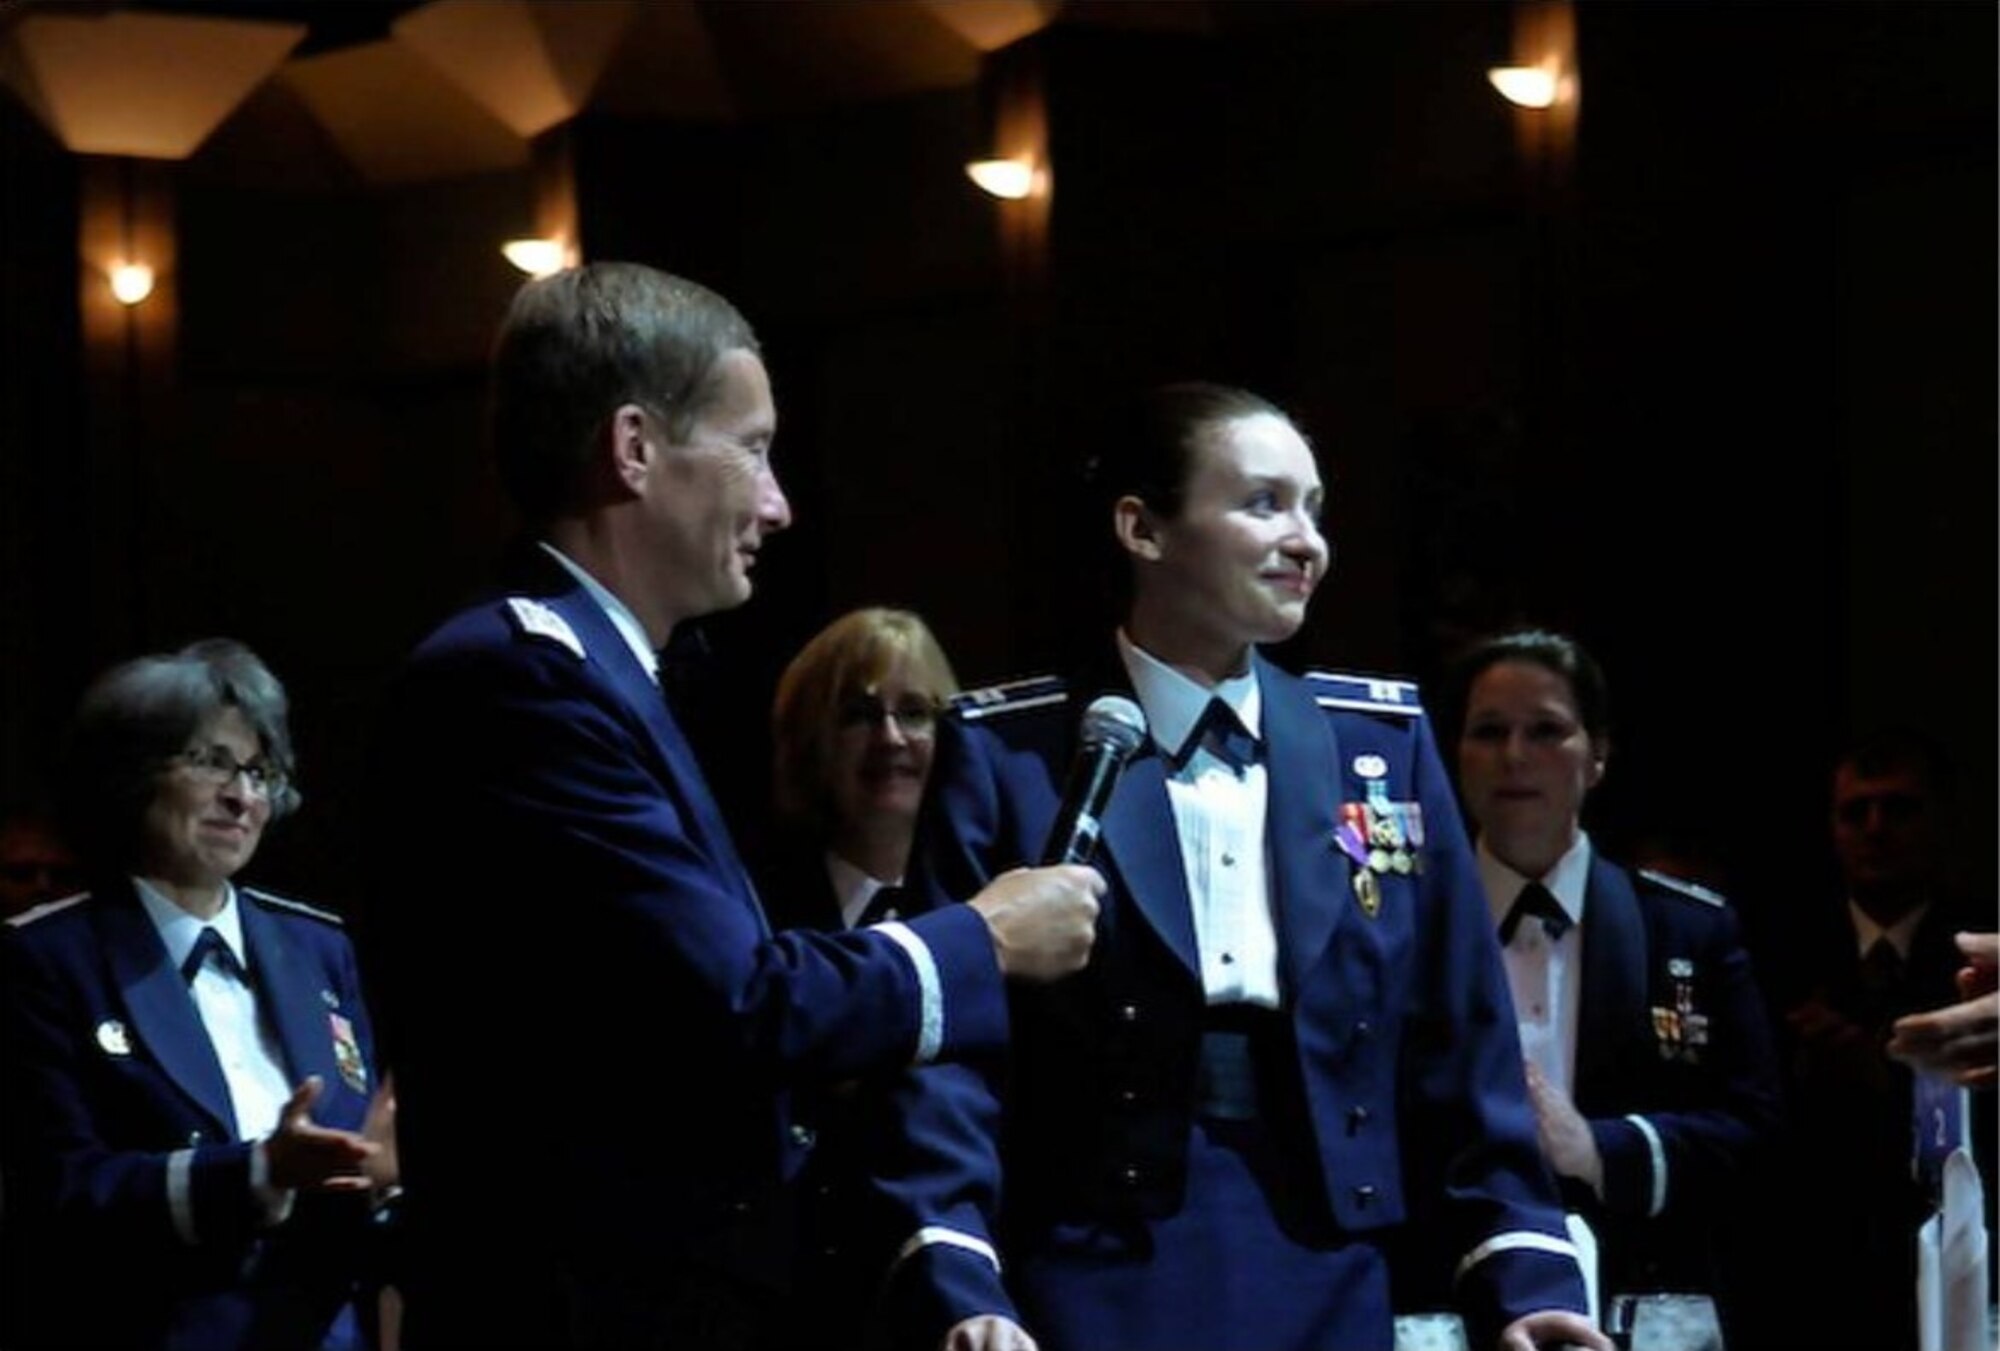 Maj. Gen. Charles Dunlap, the Air Force's deputy judge advocate general, speaks with Capt. Wendy Kosek, a Little Rock Air Force Base staff judge advocate, after awarding her a Purple Heart medal in a ceremony Oct. 29 at the Judge Advocate General's Keystone Leadership Conference in Dallas. (Courtesy photo)